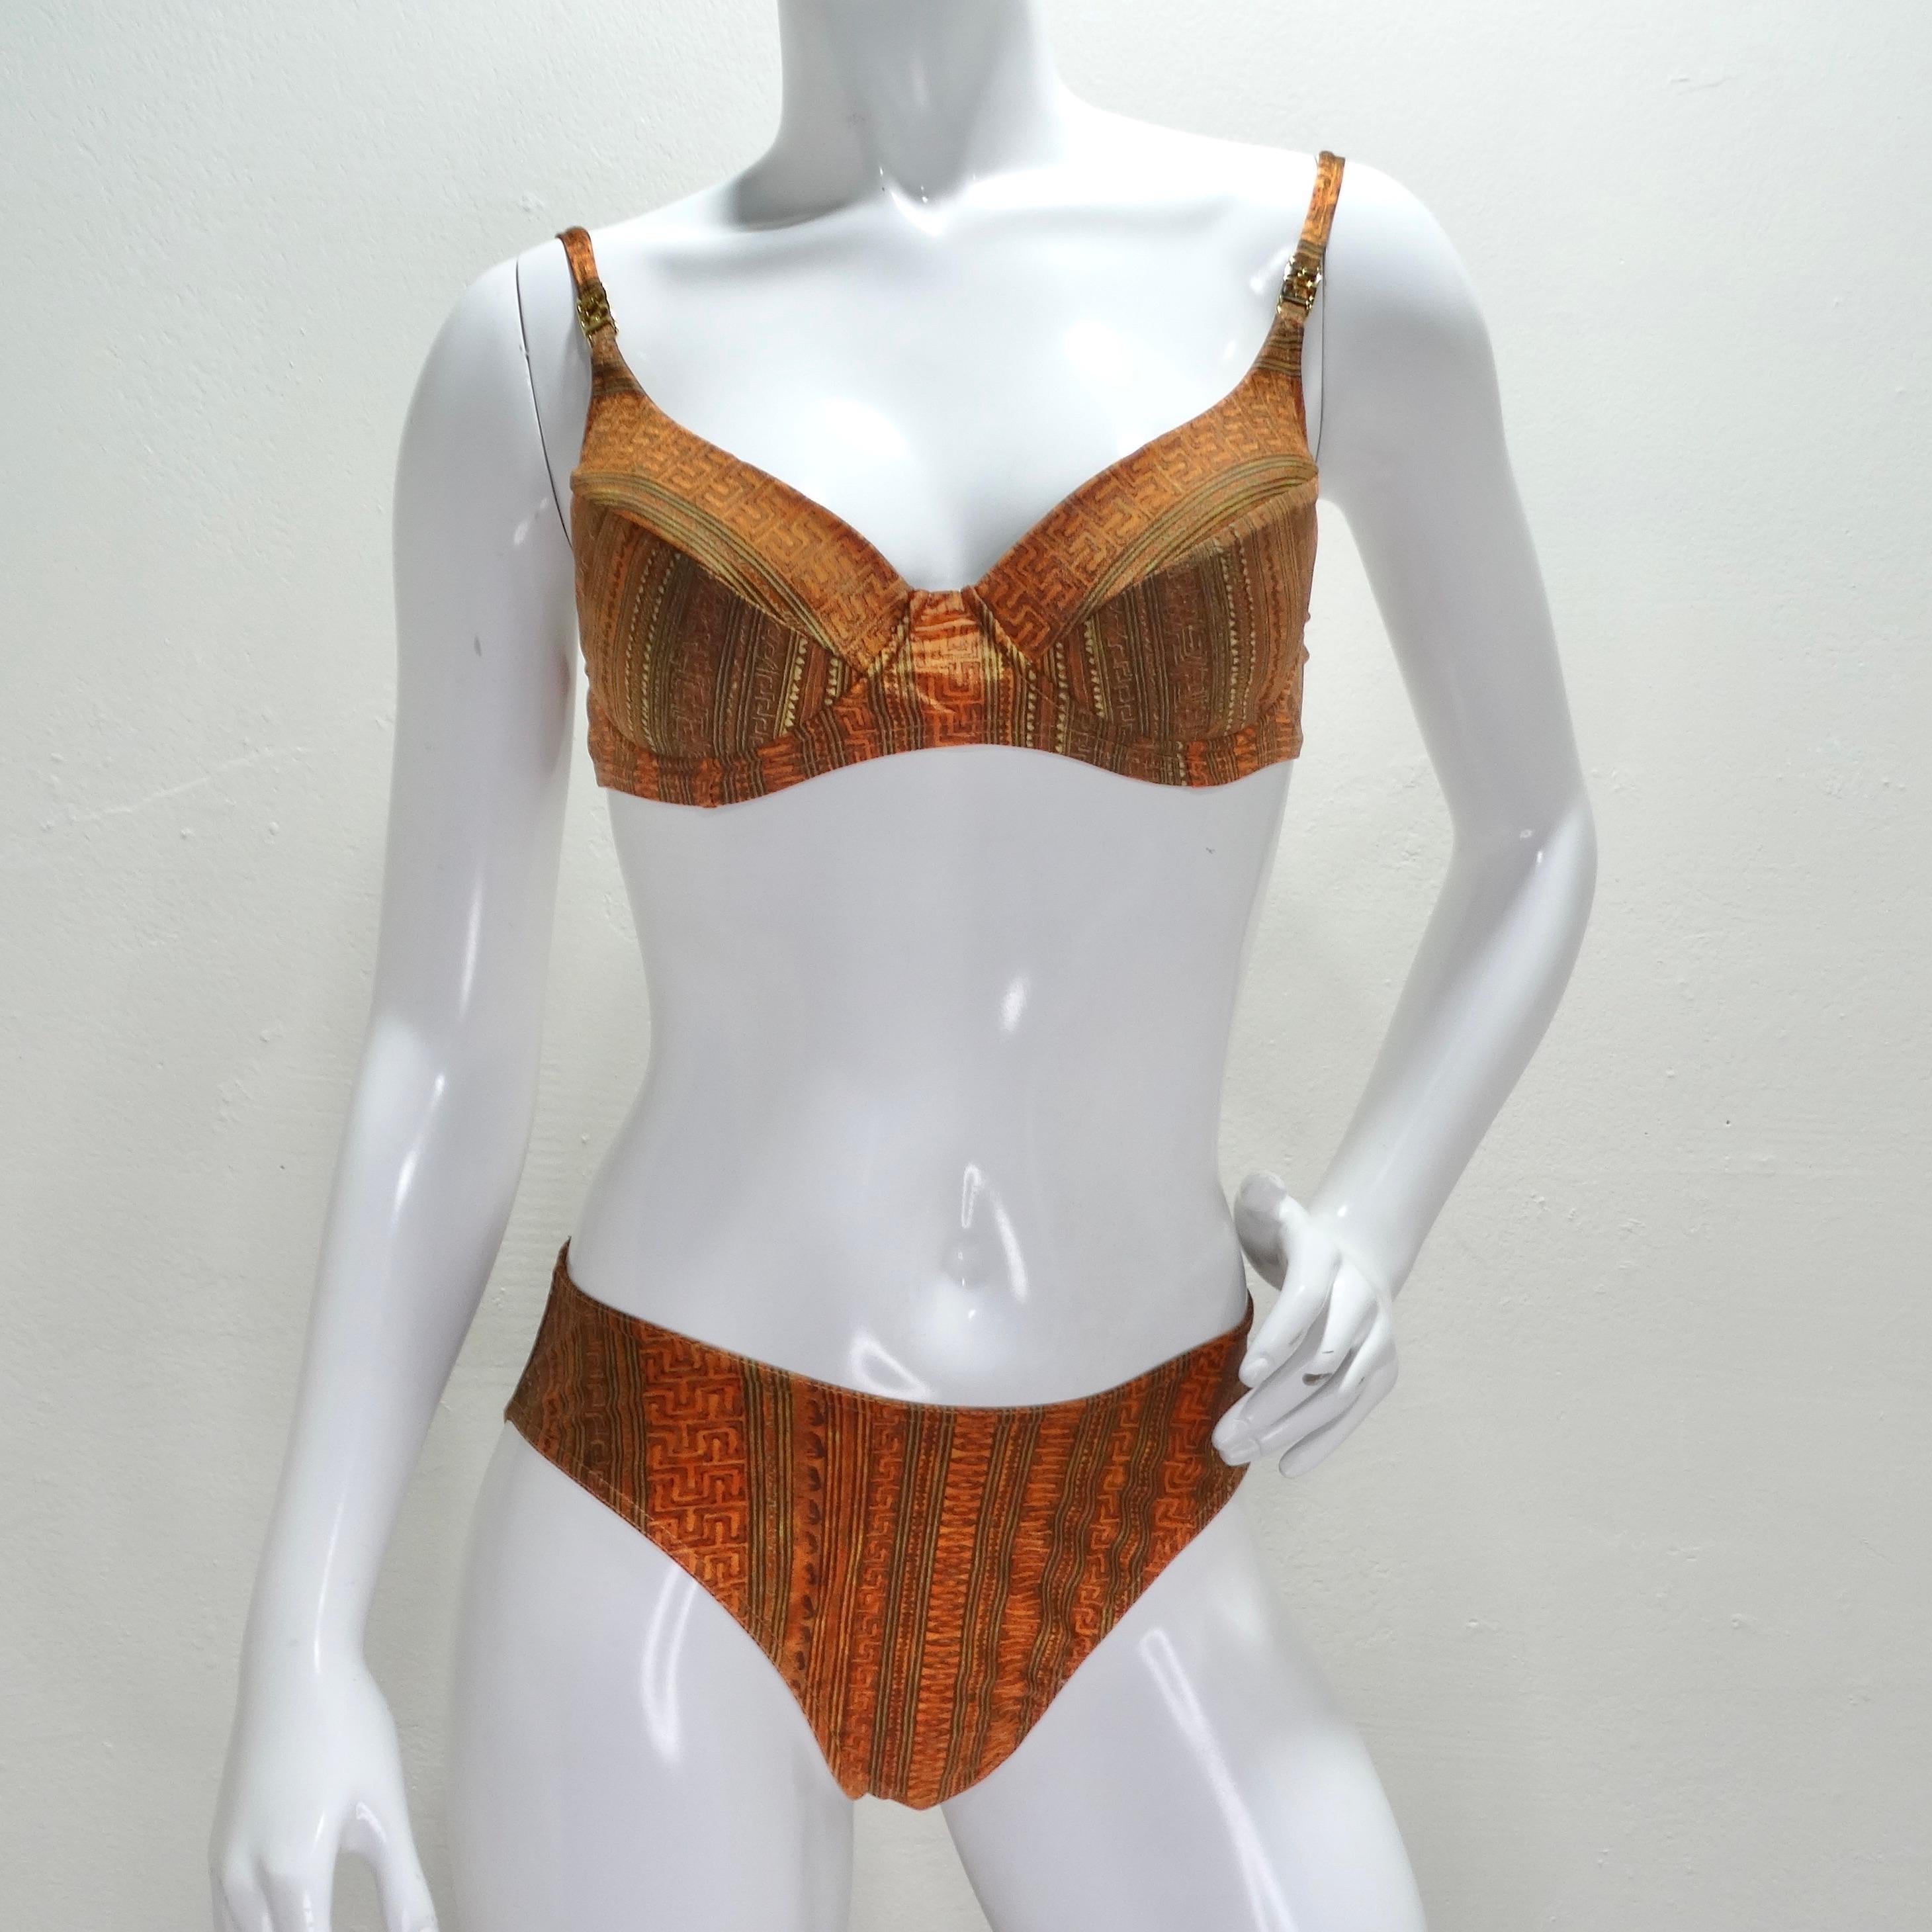 Do not miss out on this stunning piece of swimwear that captures the essence of the 1980s fashion era - the Escada bikini. With its semi full coverage high waisted style, this bikini offers a touch of vintage charm combined with a modern twist. The